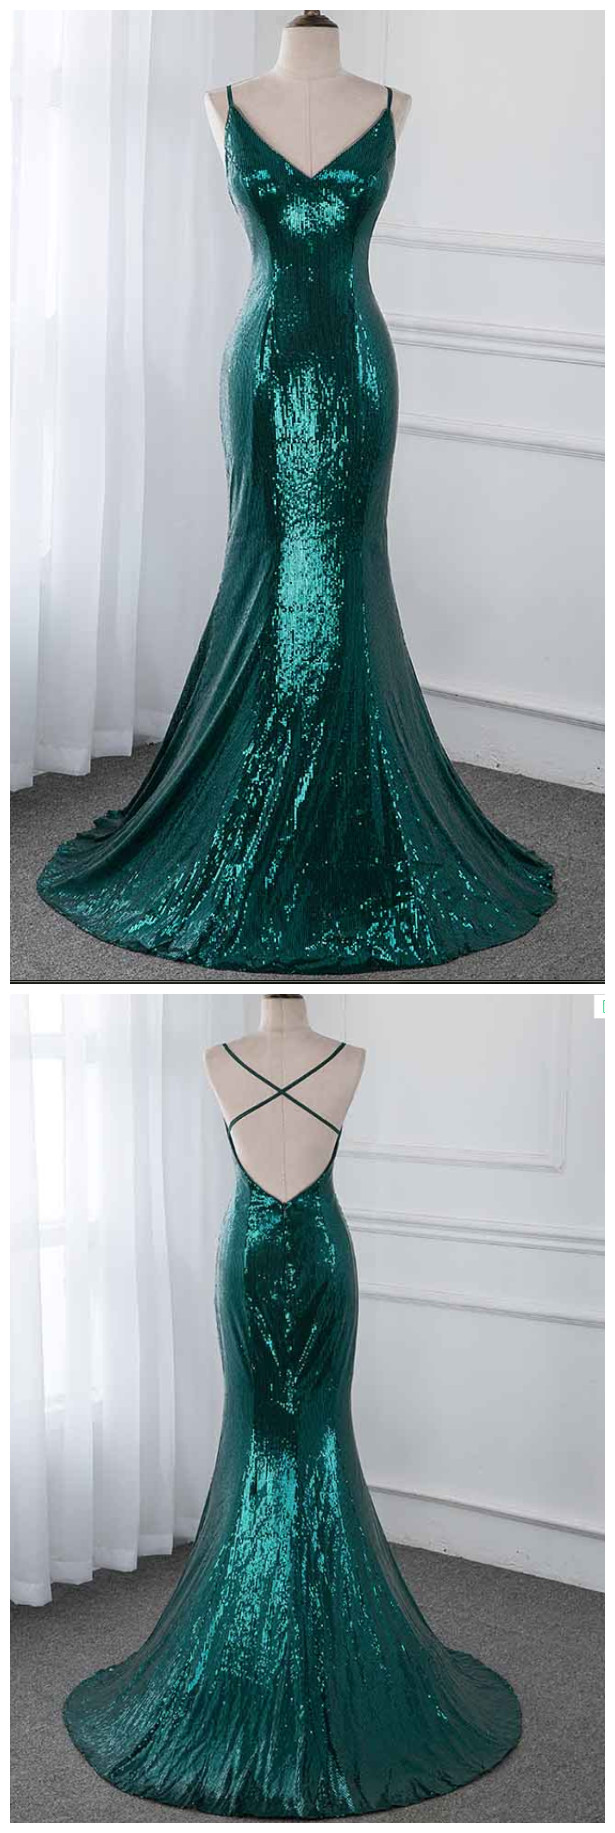 Stylish Dress Collection 2020 Emerald Green Sequins Prom Dresses Long Formal Evening Gown Dress Sleeveless